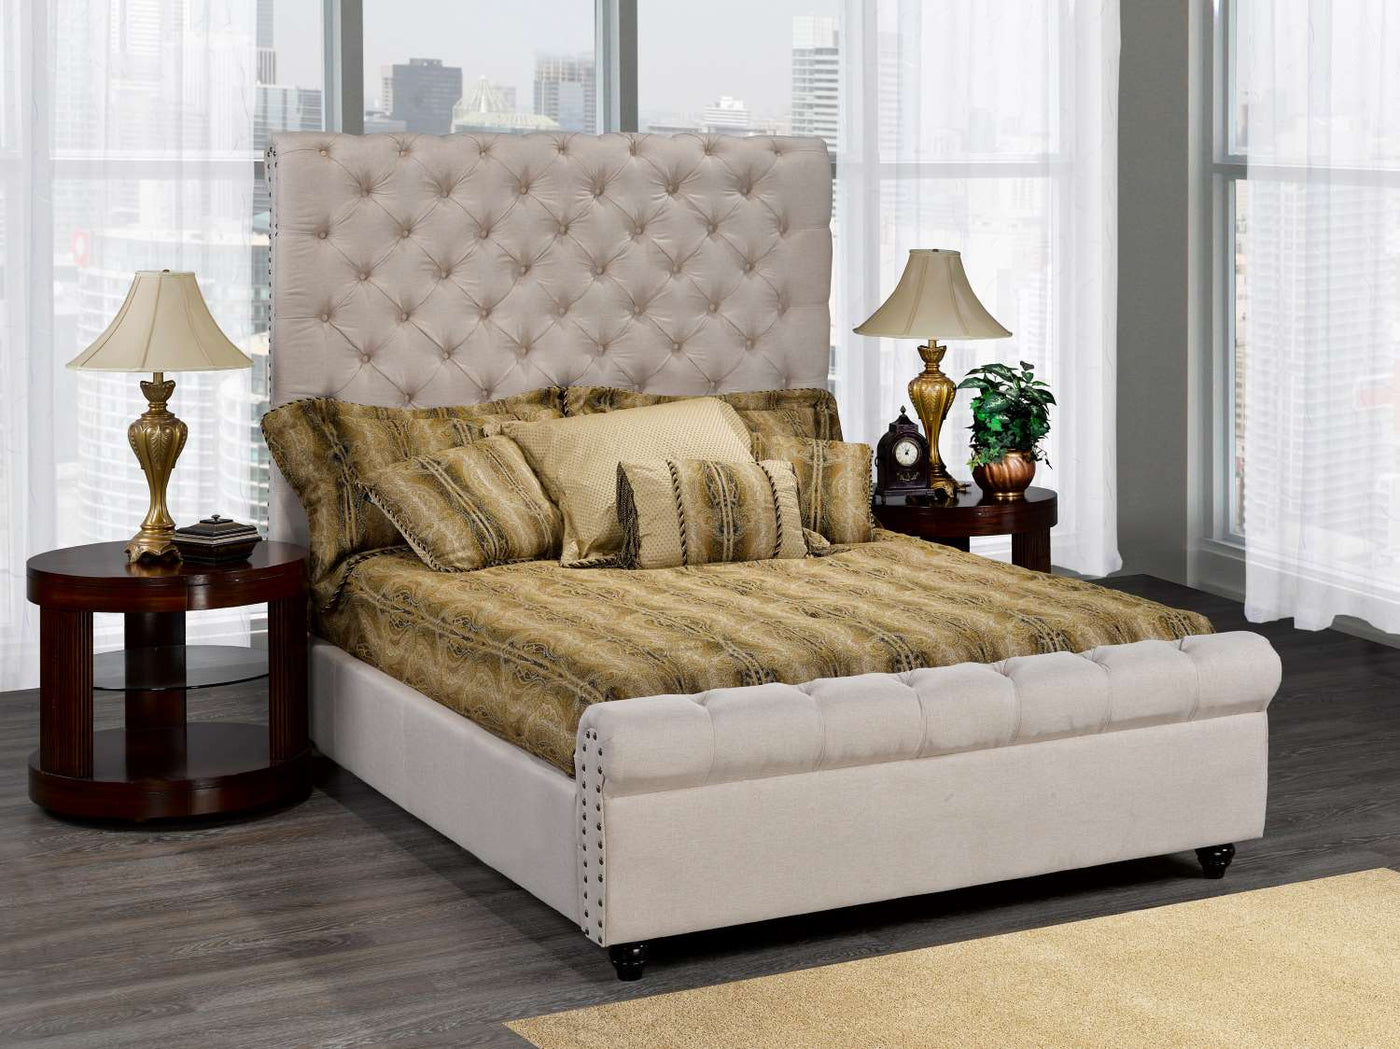 Charmia 3-Piece King Bed - Beige